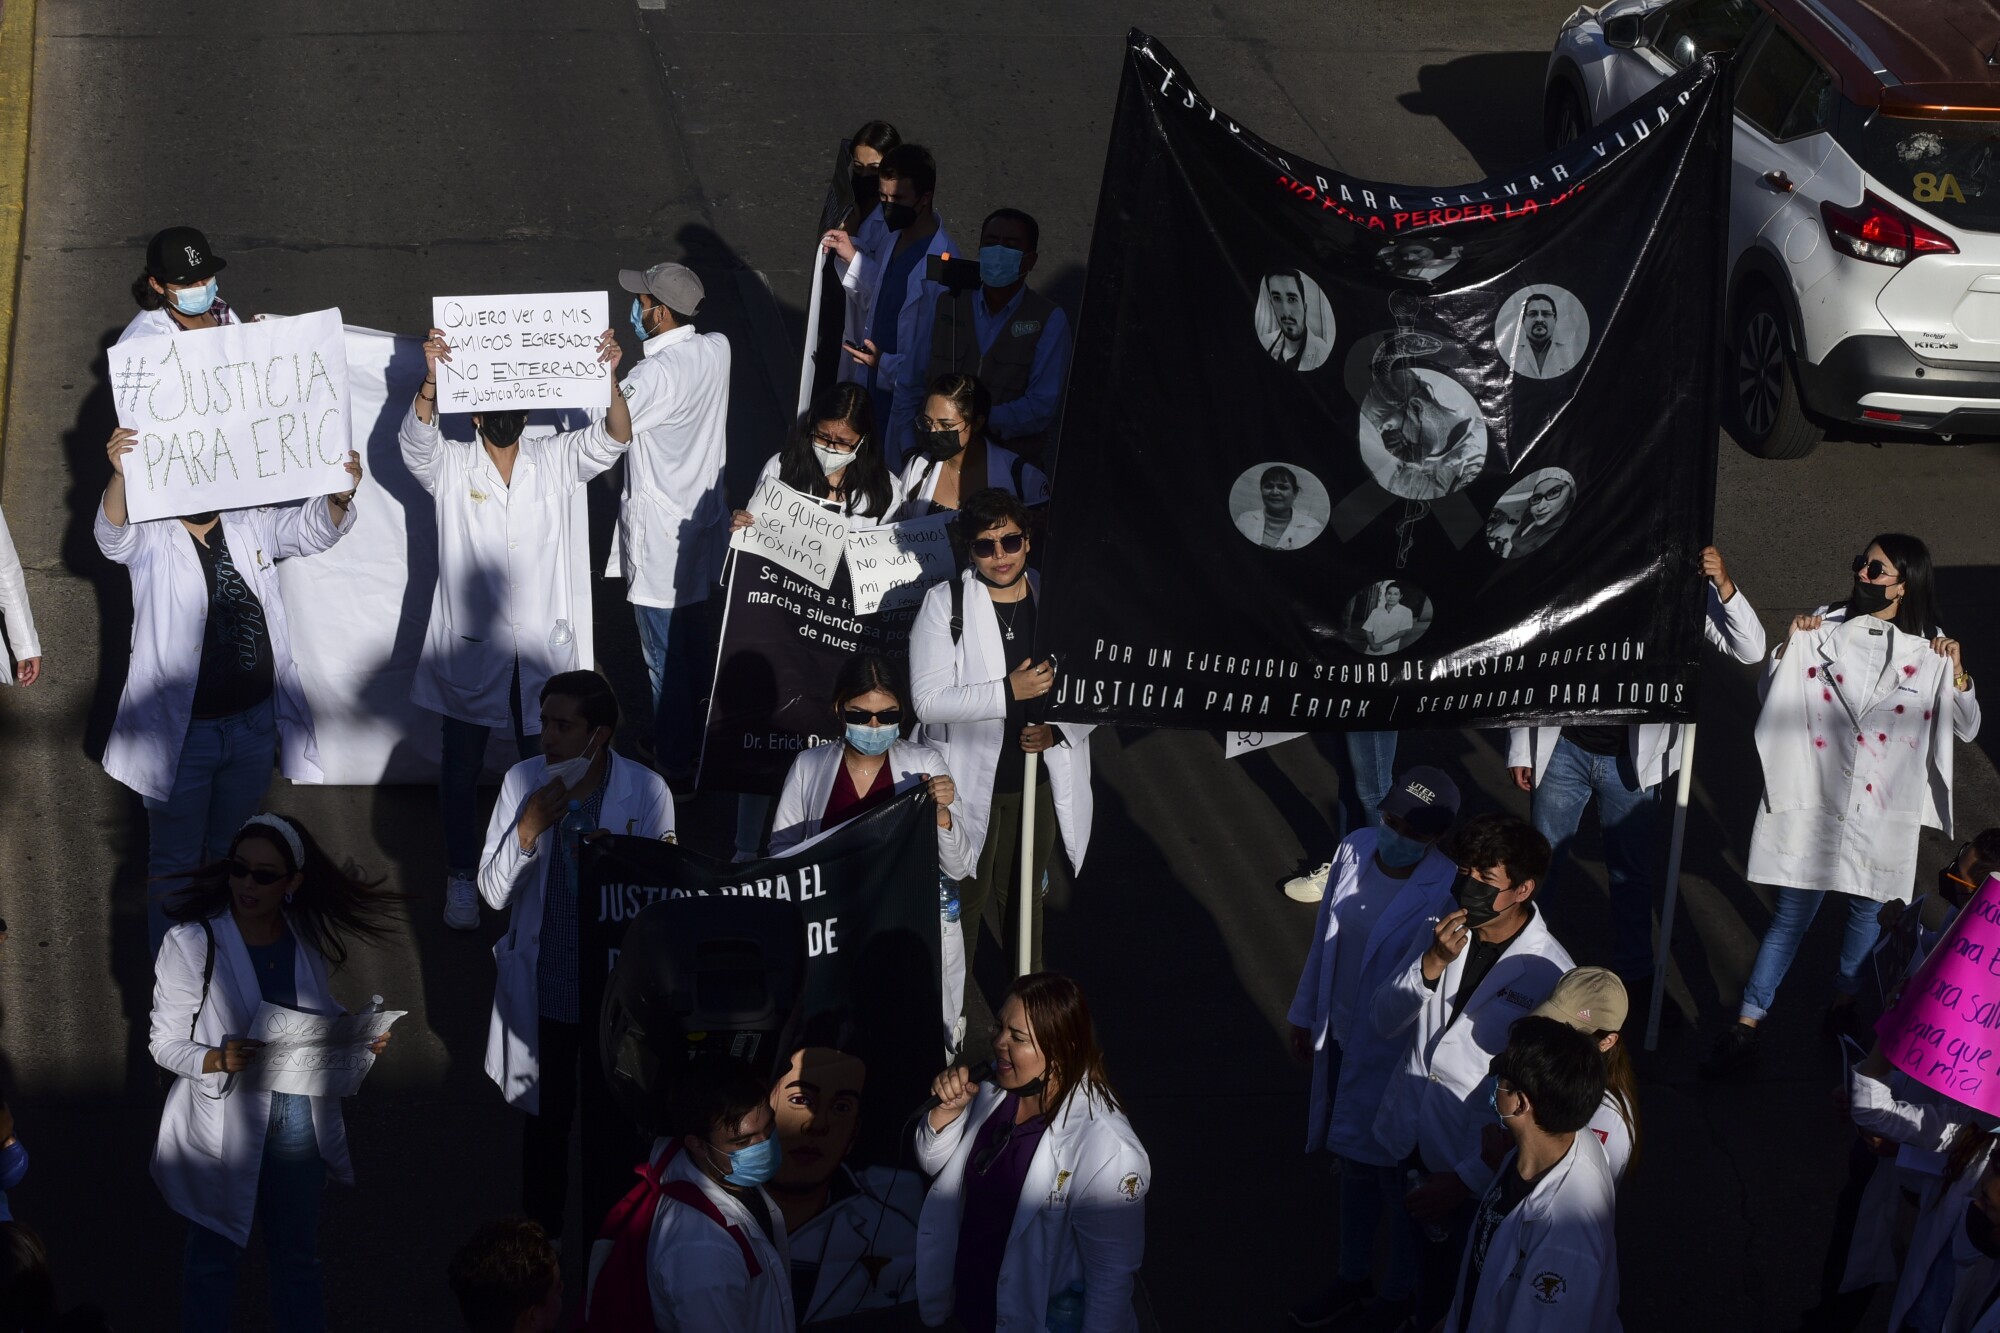 Medical students hold a protest rally 